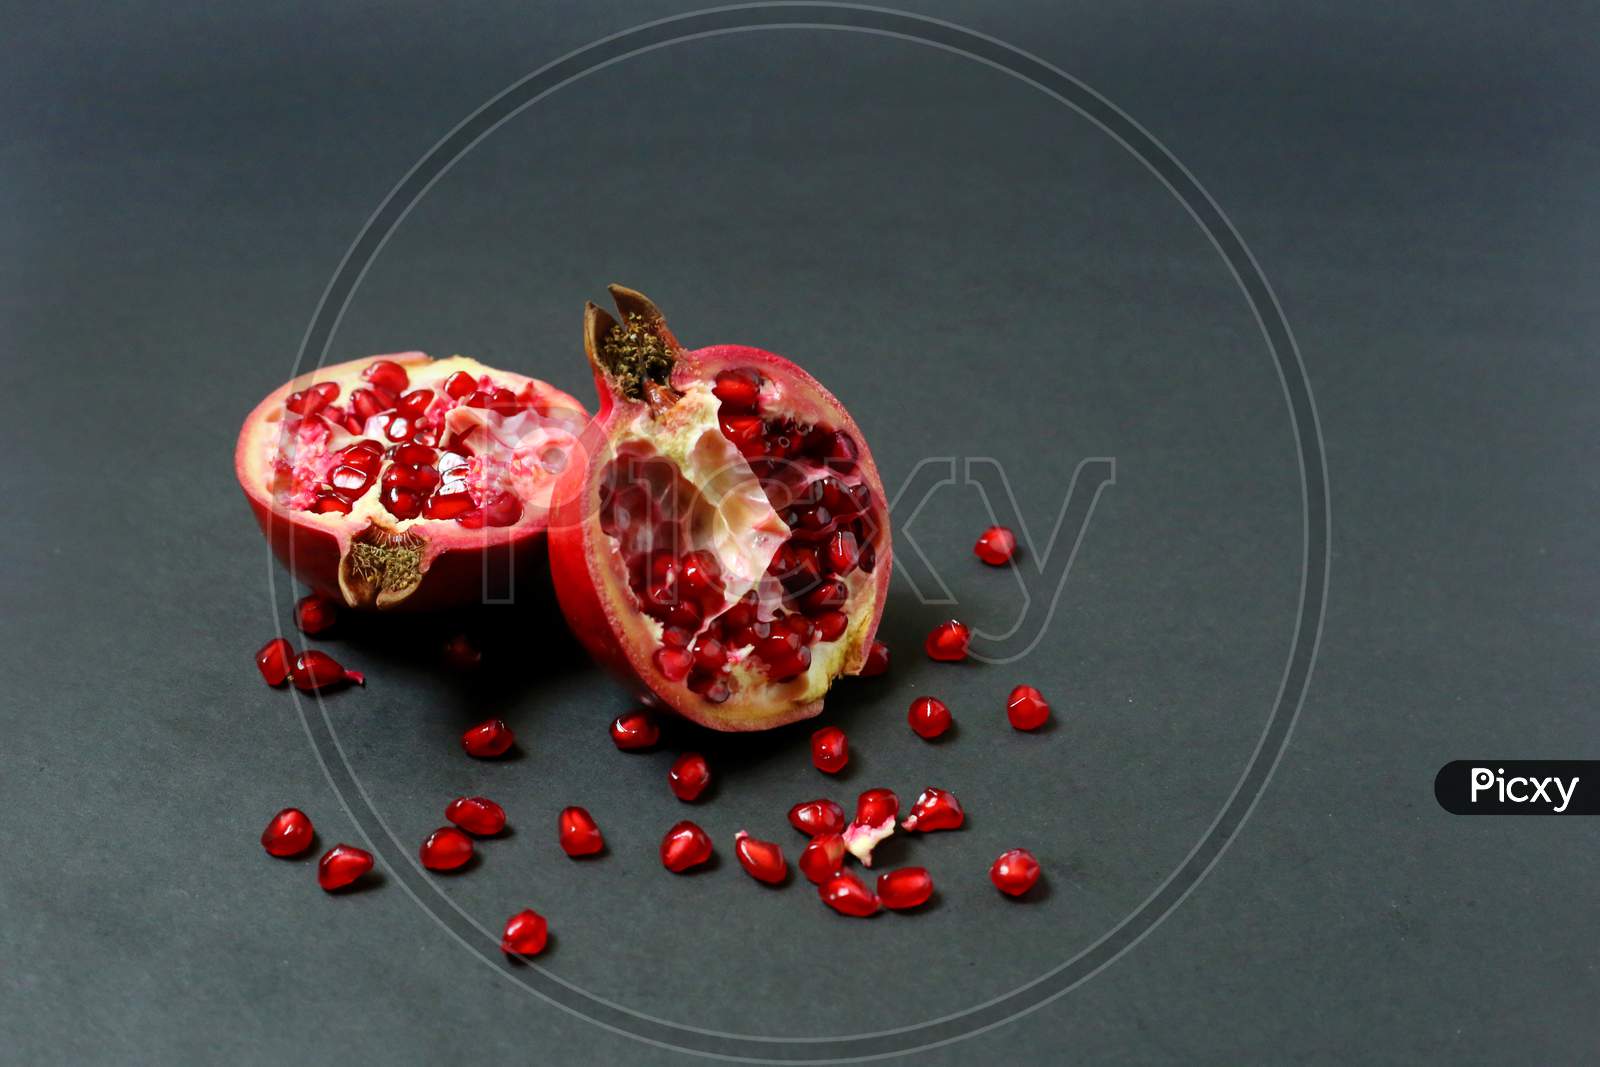 Juicy Pomegranate Fruit Isolated On Dark Background. Ripe Pomegranate Rich Red Color, Ripped In Half With Seeds Around